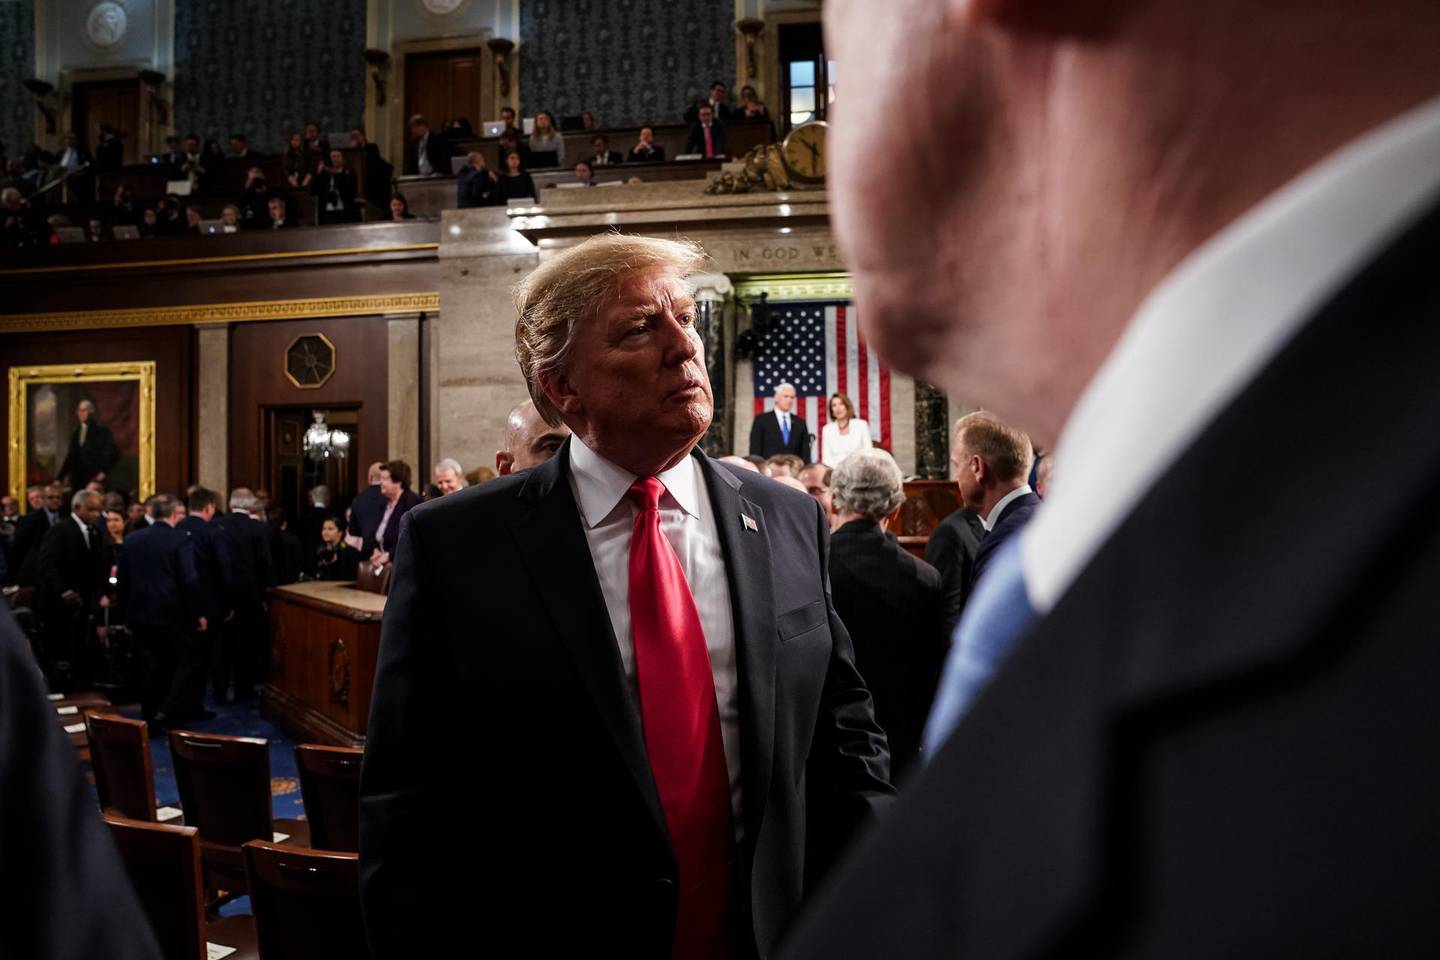 U.S. President Donald Trump departs after delivering a State of the Union address to a joint session of Congress at the U.S. Capitol in Washington, D.C., U.S., on Tuesday, Feb. 5, 2019. President Donald Trump cast his fight against illegal migration to the U.S. as a moral struggle, and charged in his second State of the Union address that “partisan investigations” threaten economic progress under his administration. Photographer: Doug Mills/Pool via Bloomberg